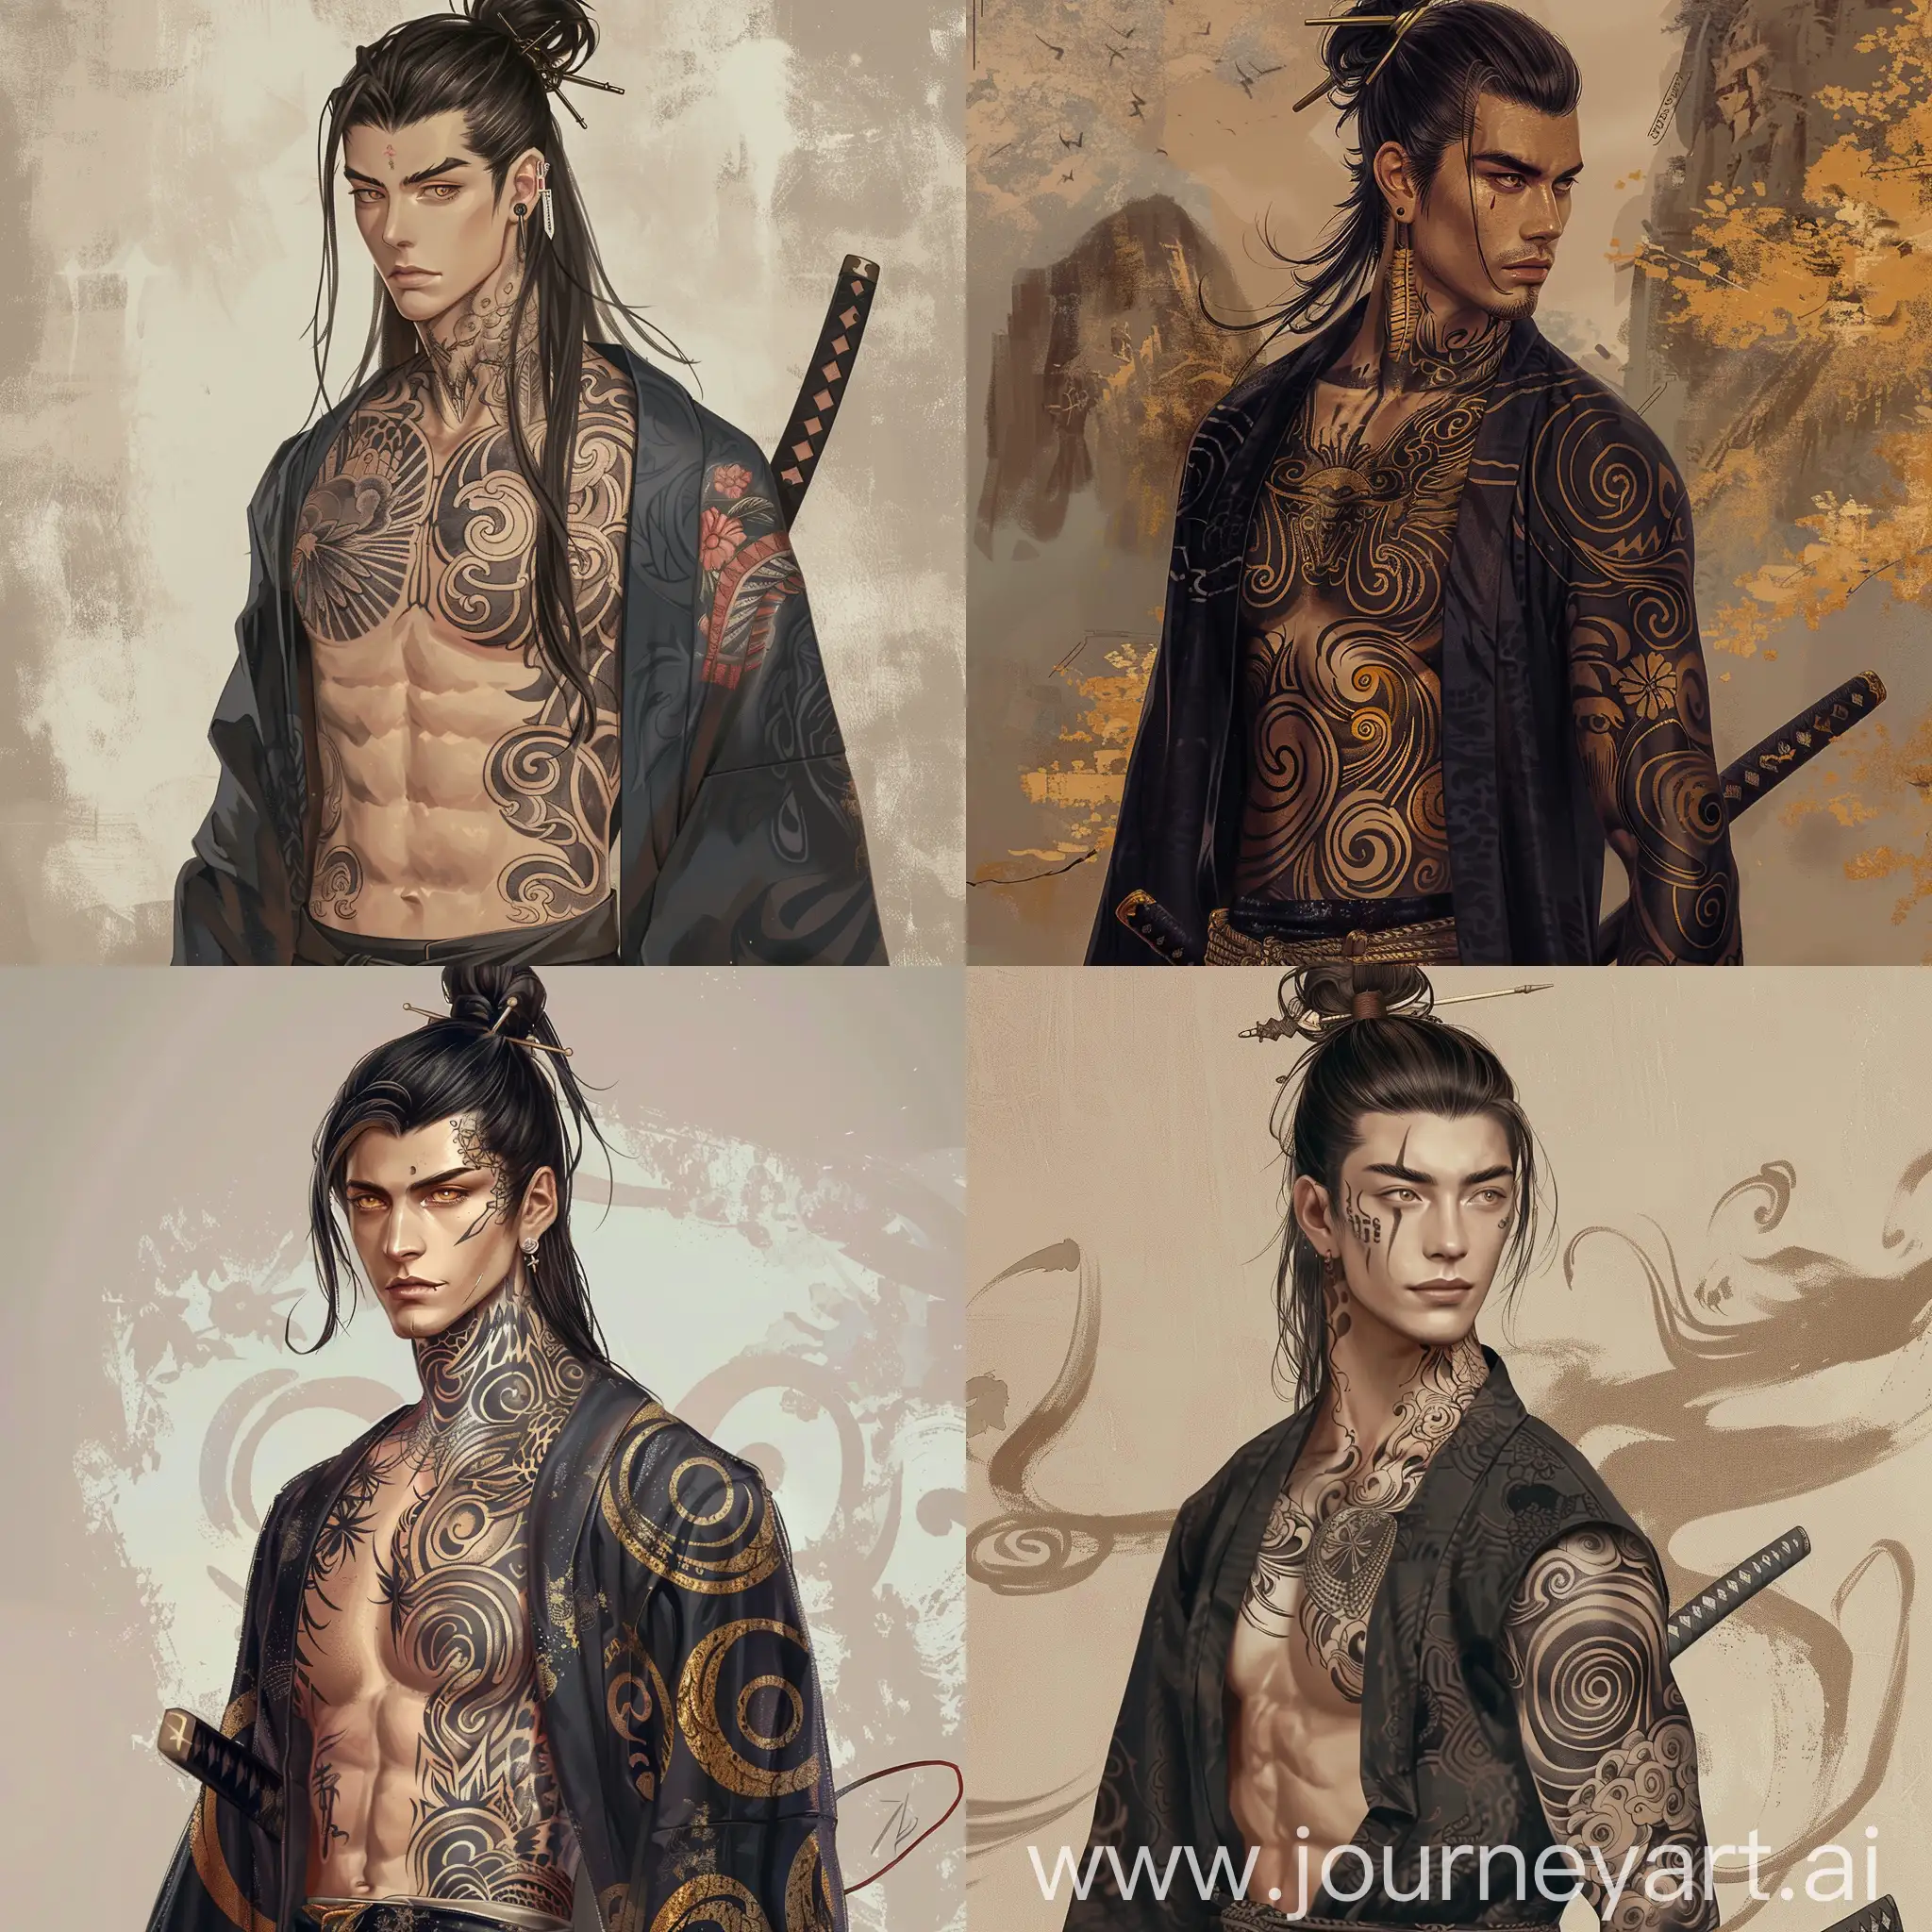 Tall, fair skin , long black hair in a bun half up-do with hairpin, no facial hair, golden eyes, muscular physiques with abs, swirling tattoos on chest,arm and back,  japanese , high rank traditional clothing,  god, godly aura, cute, hot, katana